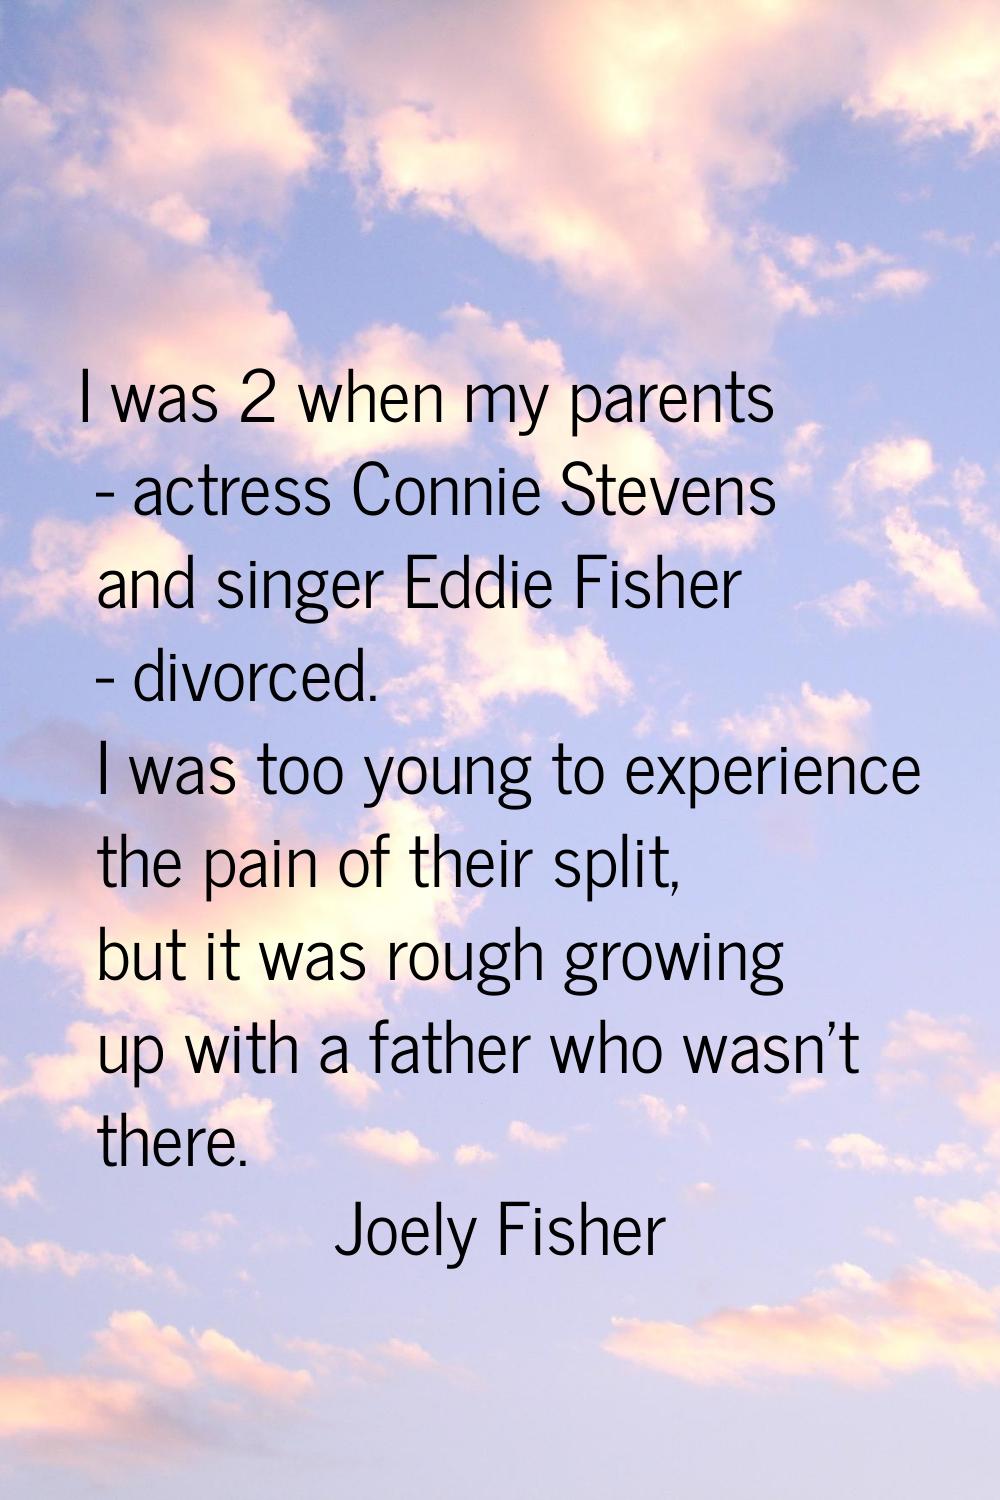 I was 2 when my parents - actress Connie Stevens and singer Eddie Fisher - divorced. I was too youn